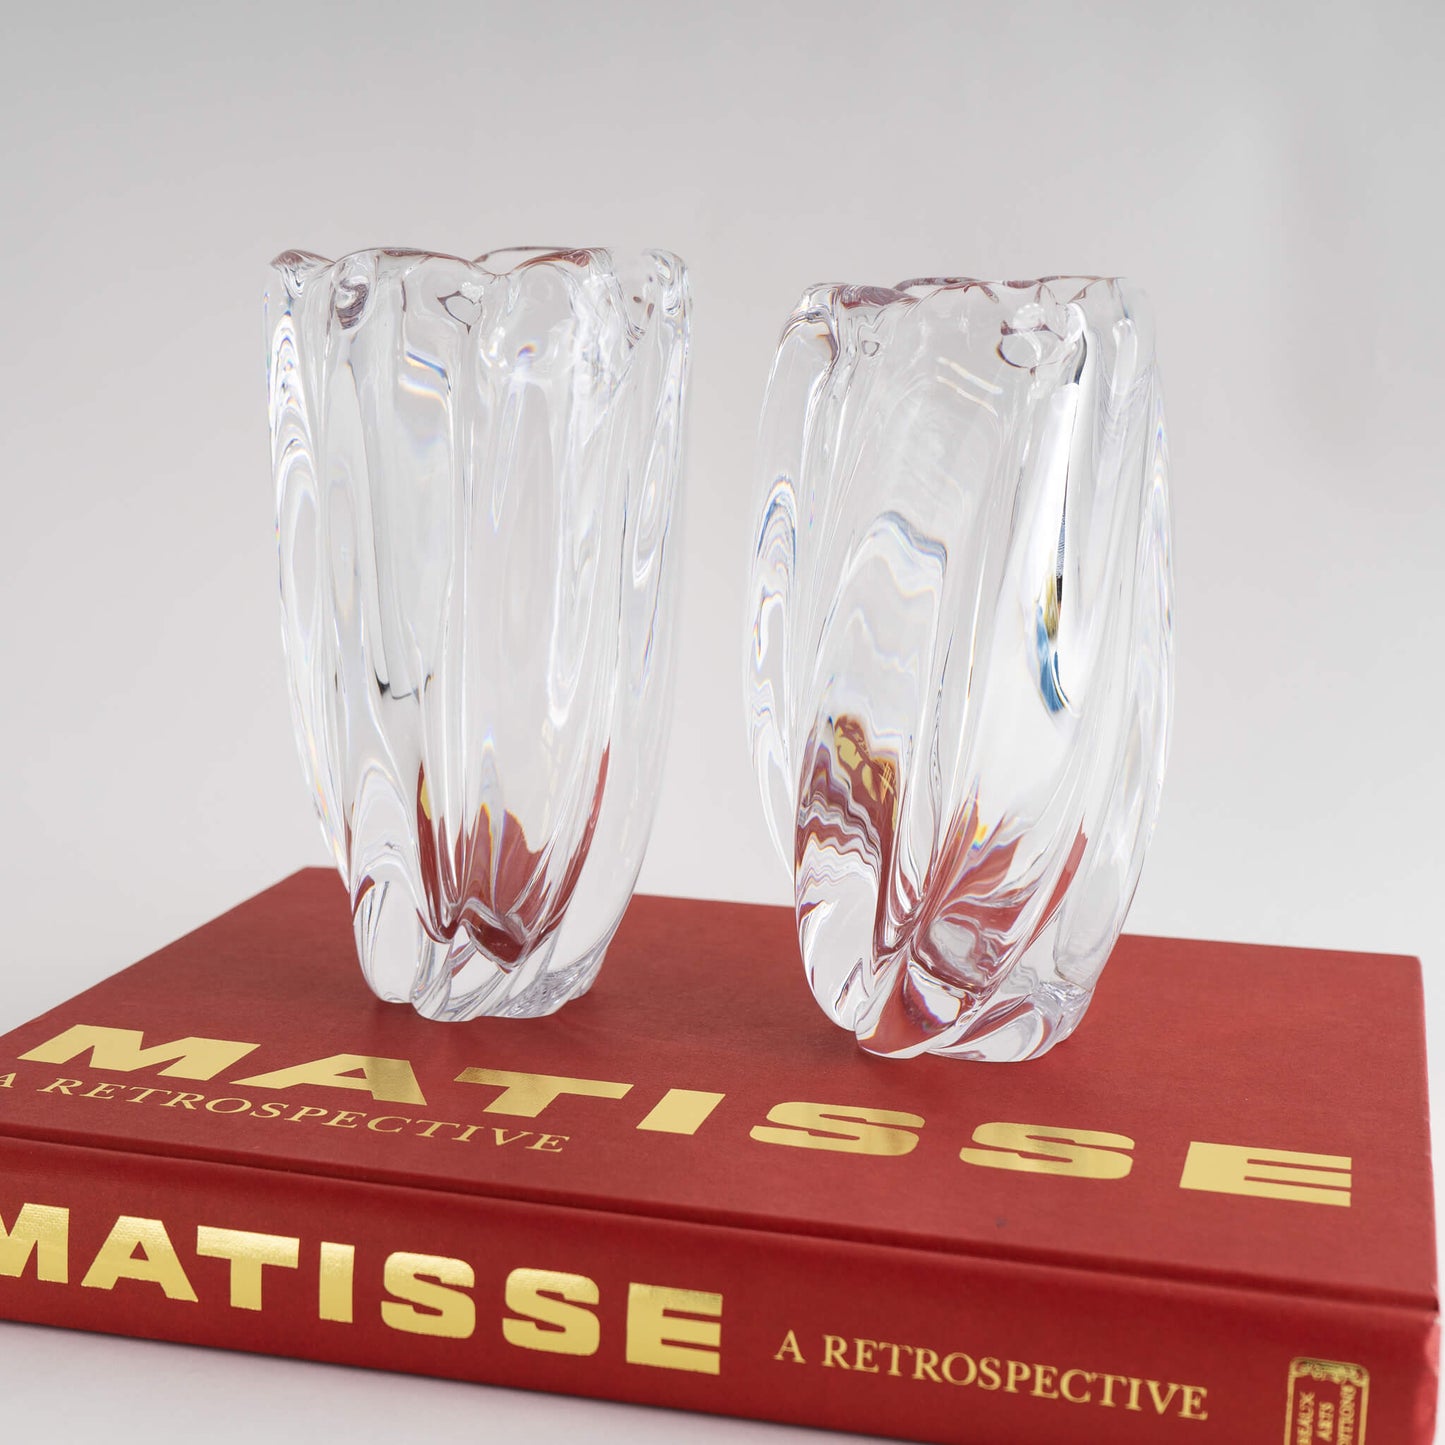 Vintage Orrefors Crystal Tall Waterfall Vase by Edvin Ohrstrom - A Pair